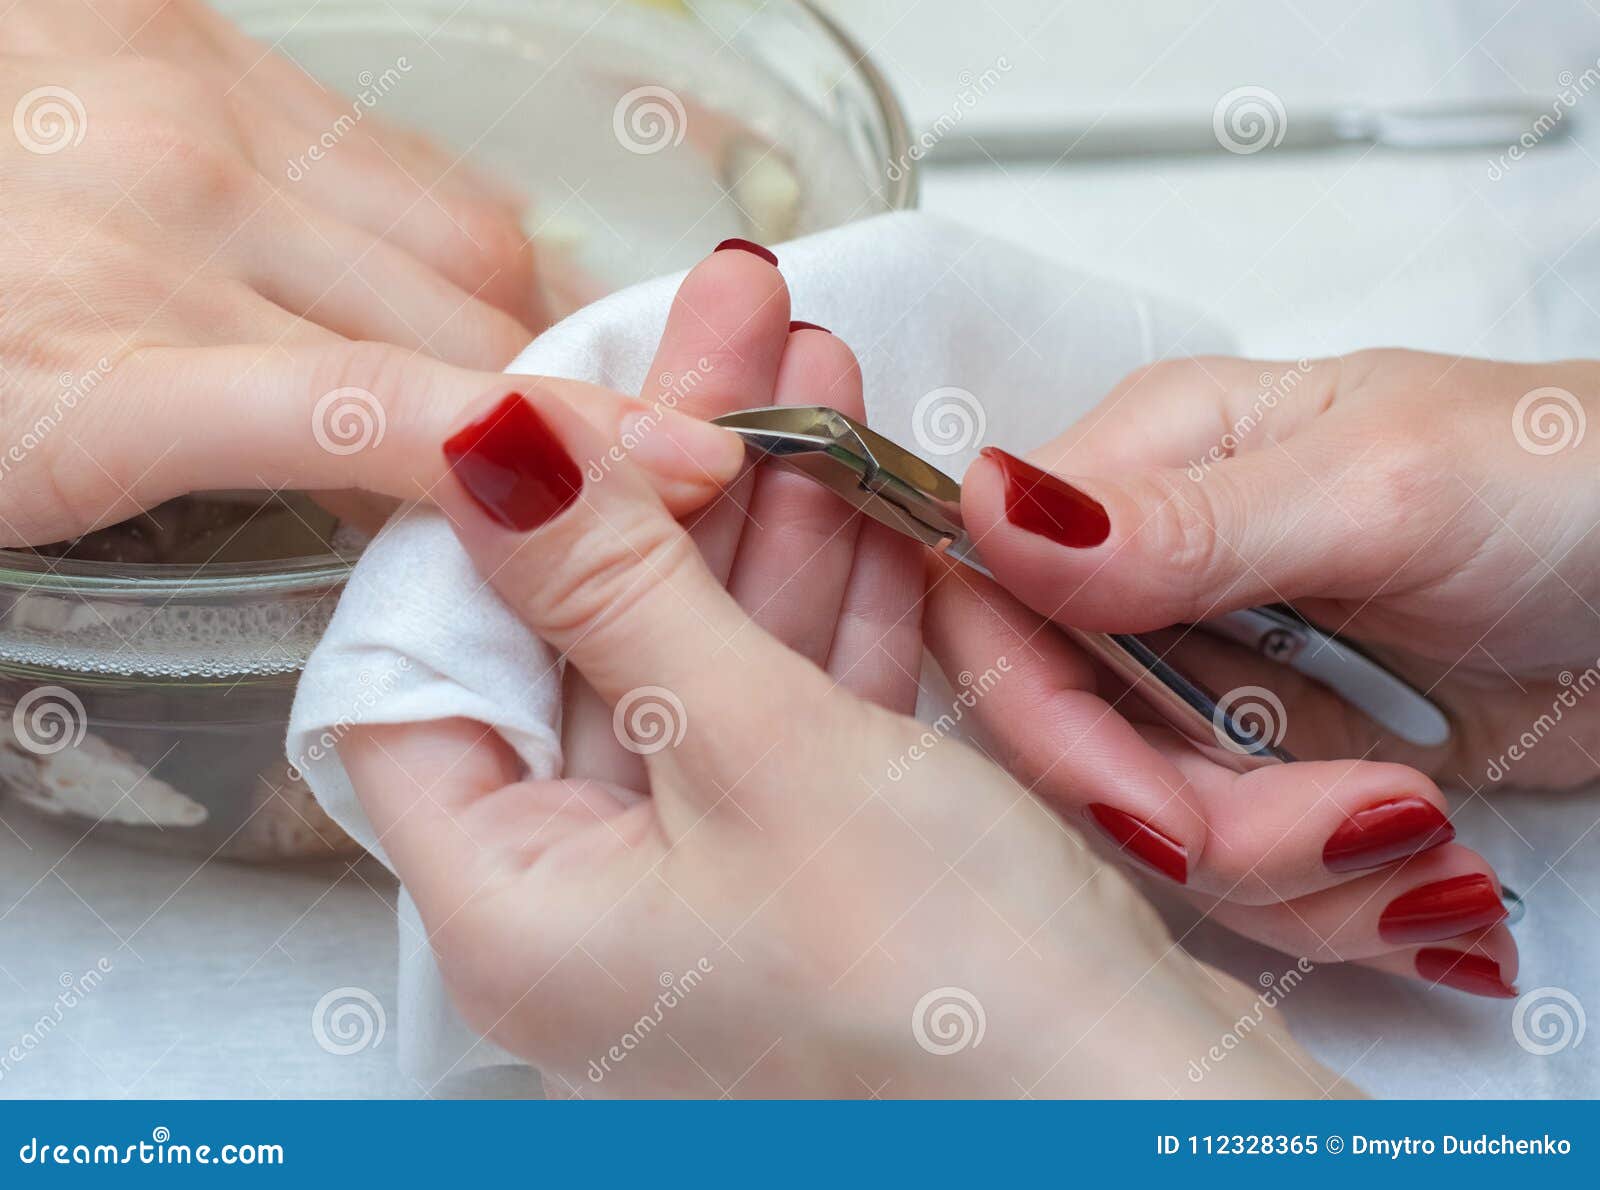 the master of the manicure cuts the cuticles on the hands in the beauty salon.